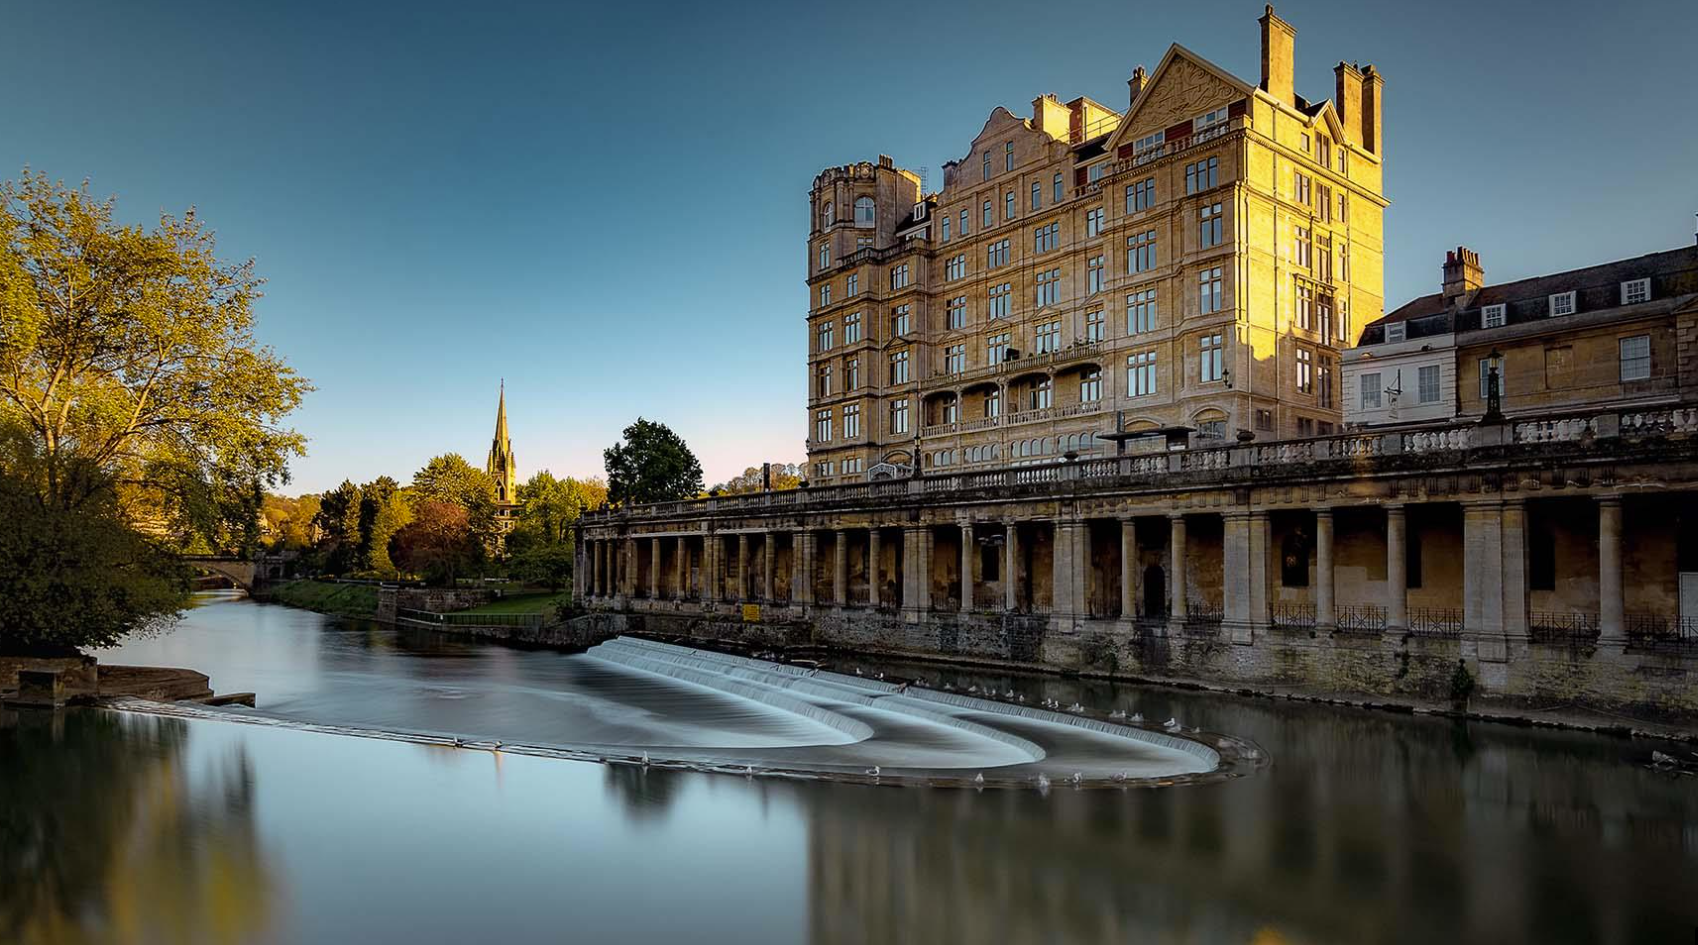 Best things to do in Bath UK - AJ Saunders - Empire Hotel by Lloyd Evans Photography - Visit Bath